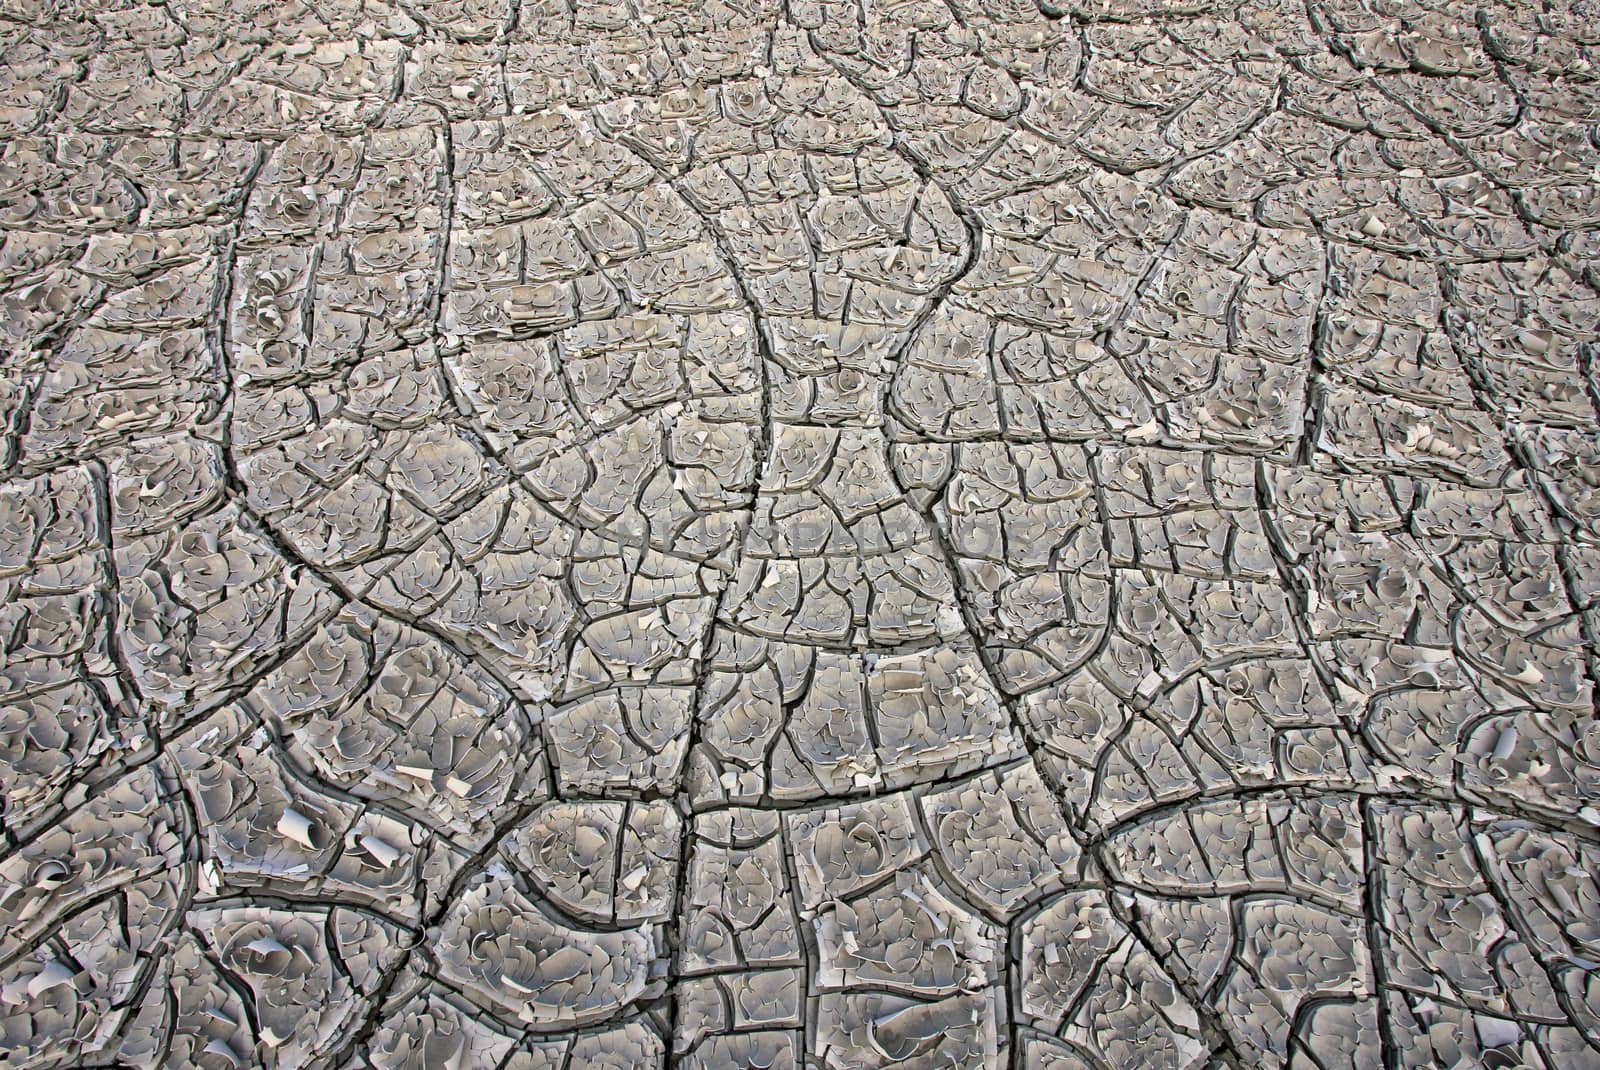 Dry earth and cracks texture, Patagonia, Argentina